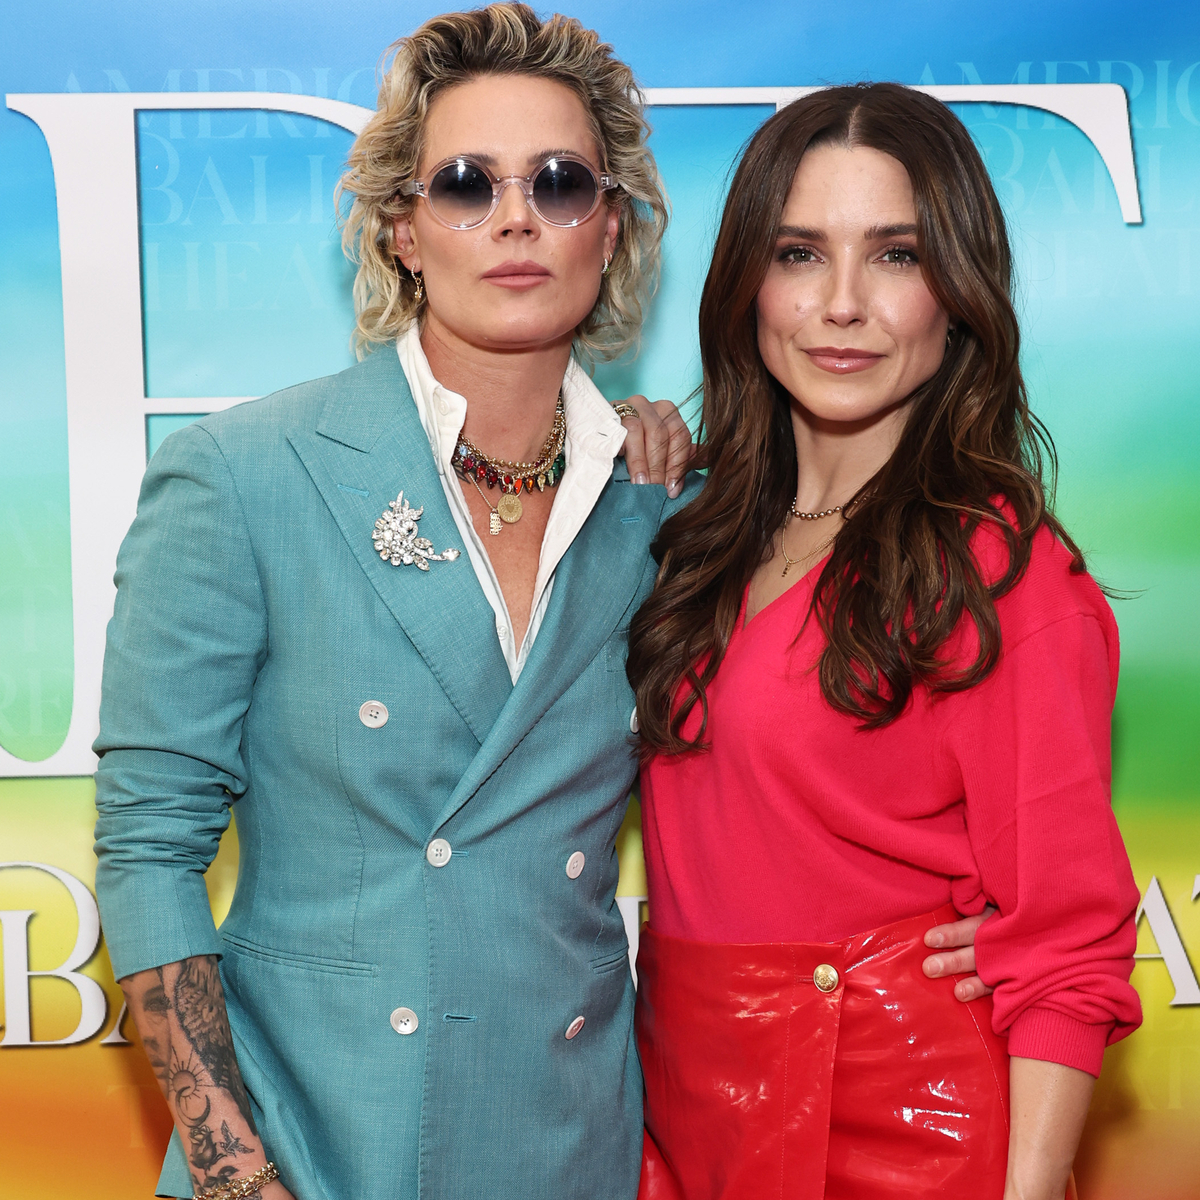 Sophia Bush Gushes Over “Unexpected” Love Story With Ashlyn Harris